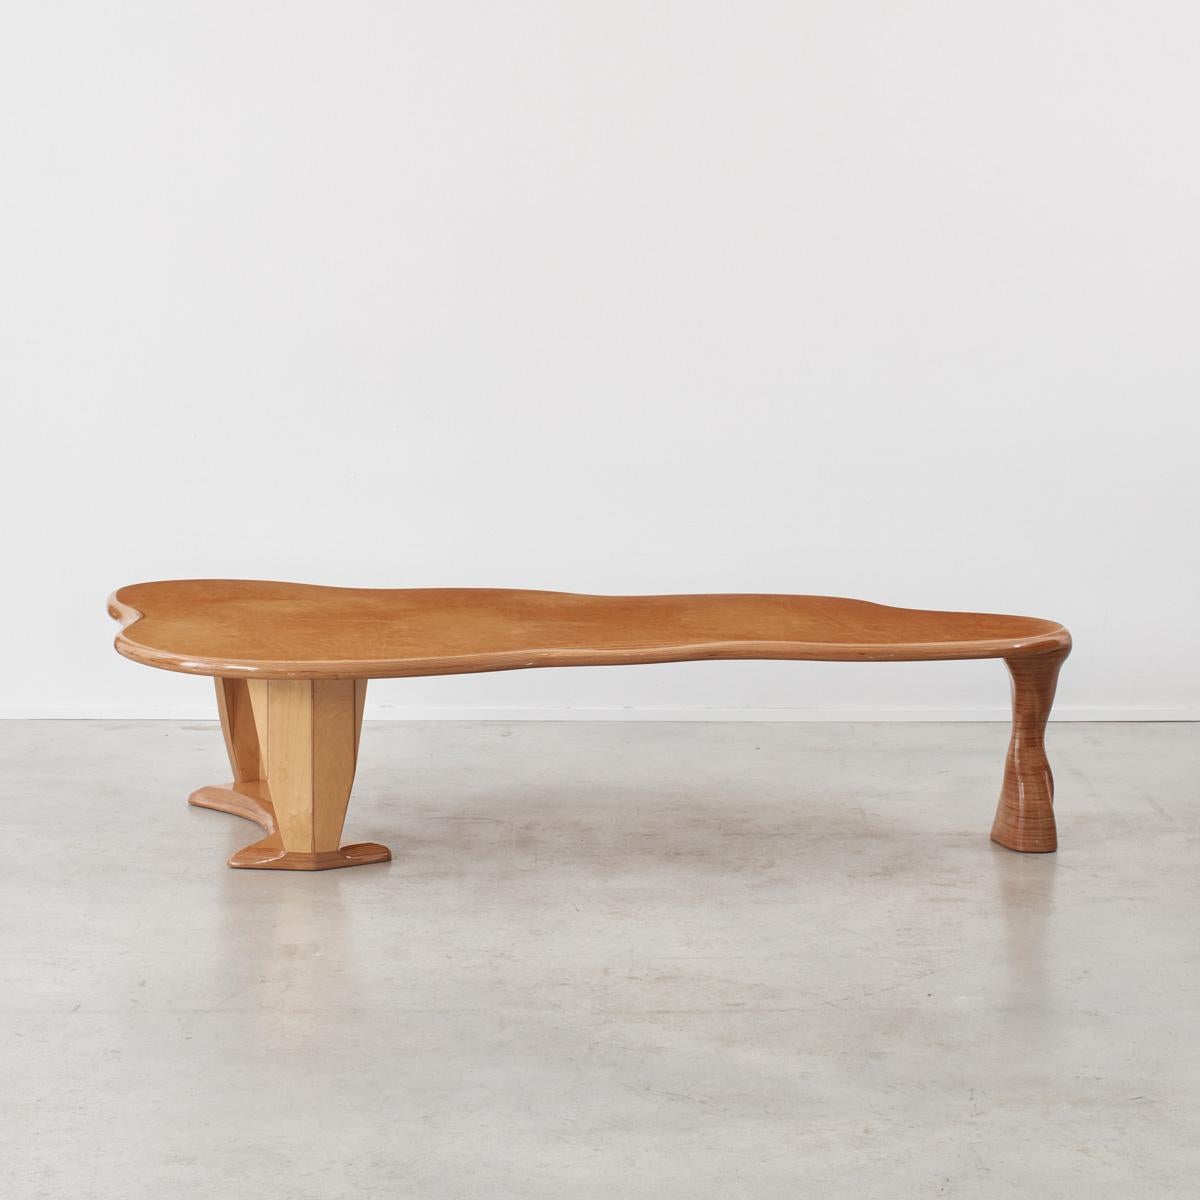 A beautifully constructed, organic-formed table on three legs. The single leg has been sculpted into the form reminiscent of an animal’s leg, and the rear legs, set upon a base, possess a more machined aesthetic.